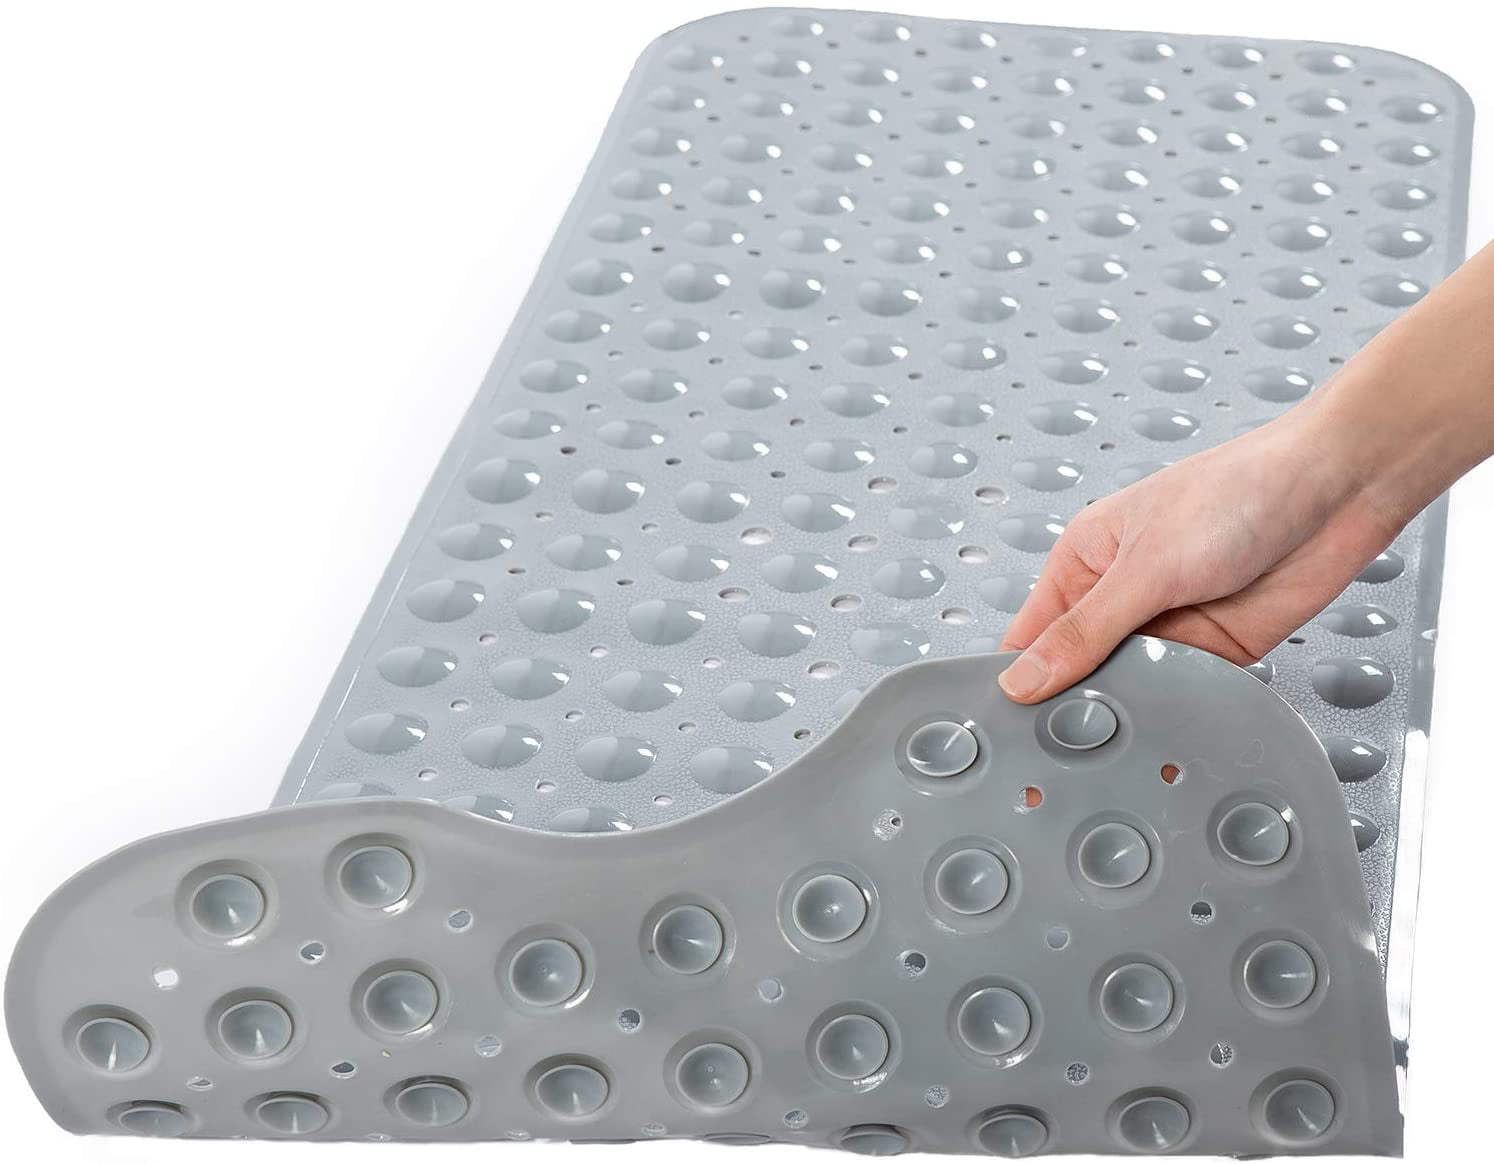 Rubber Mats for Bath and Shower; A Safety Product - Ortohispania